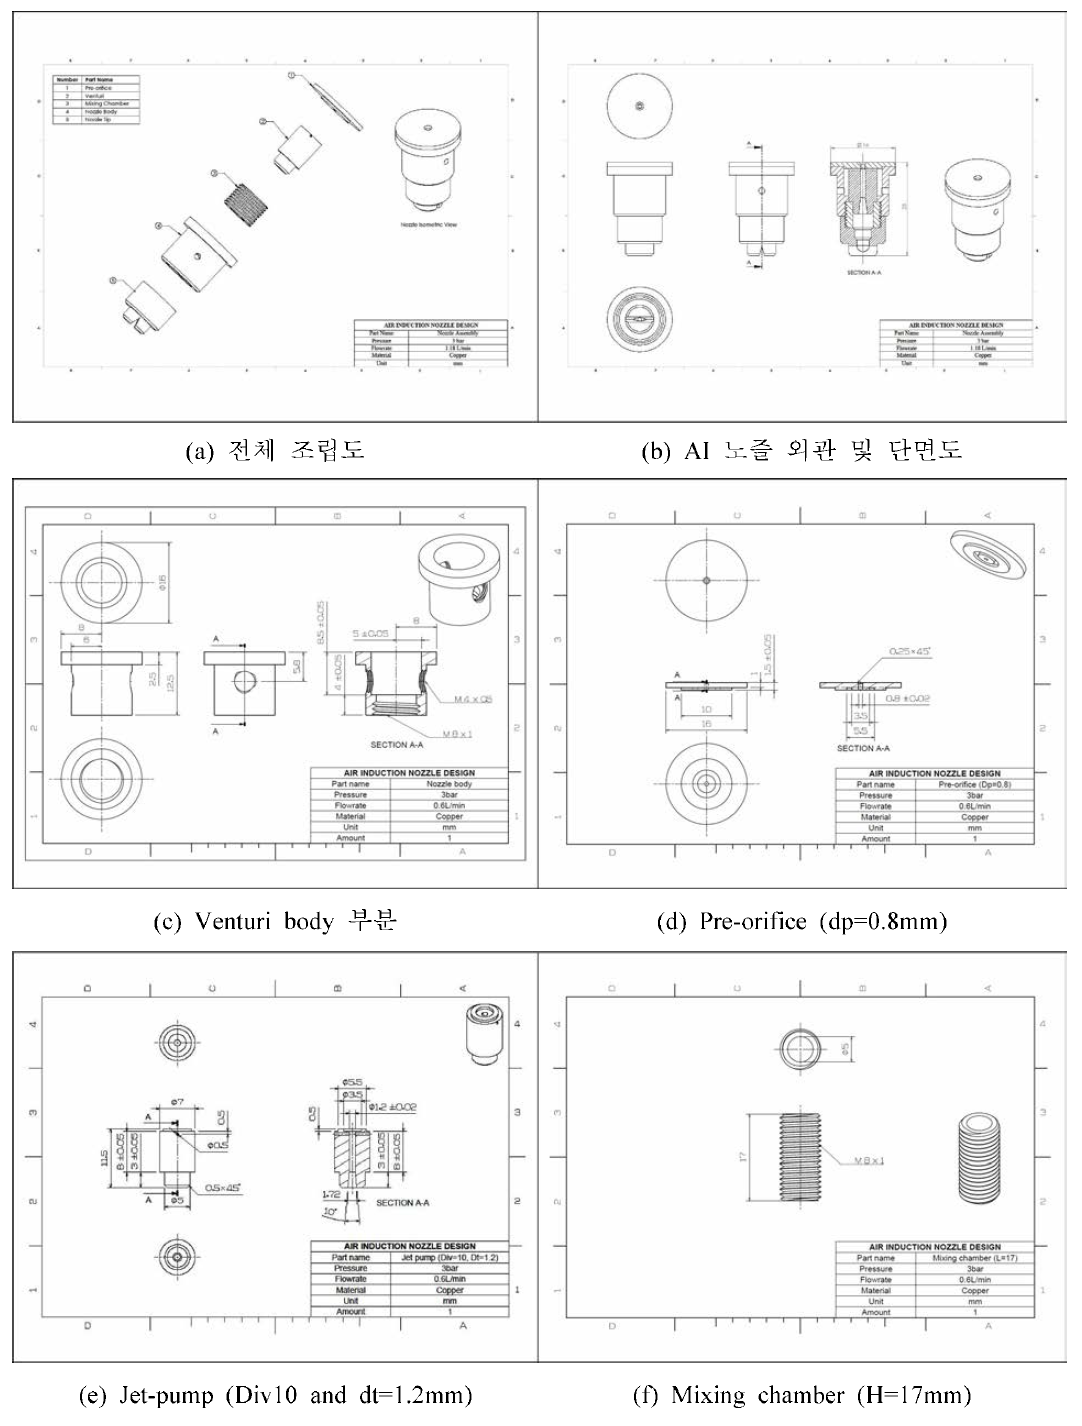 Drawings of 4th version AI nozzle